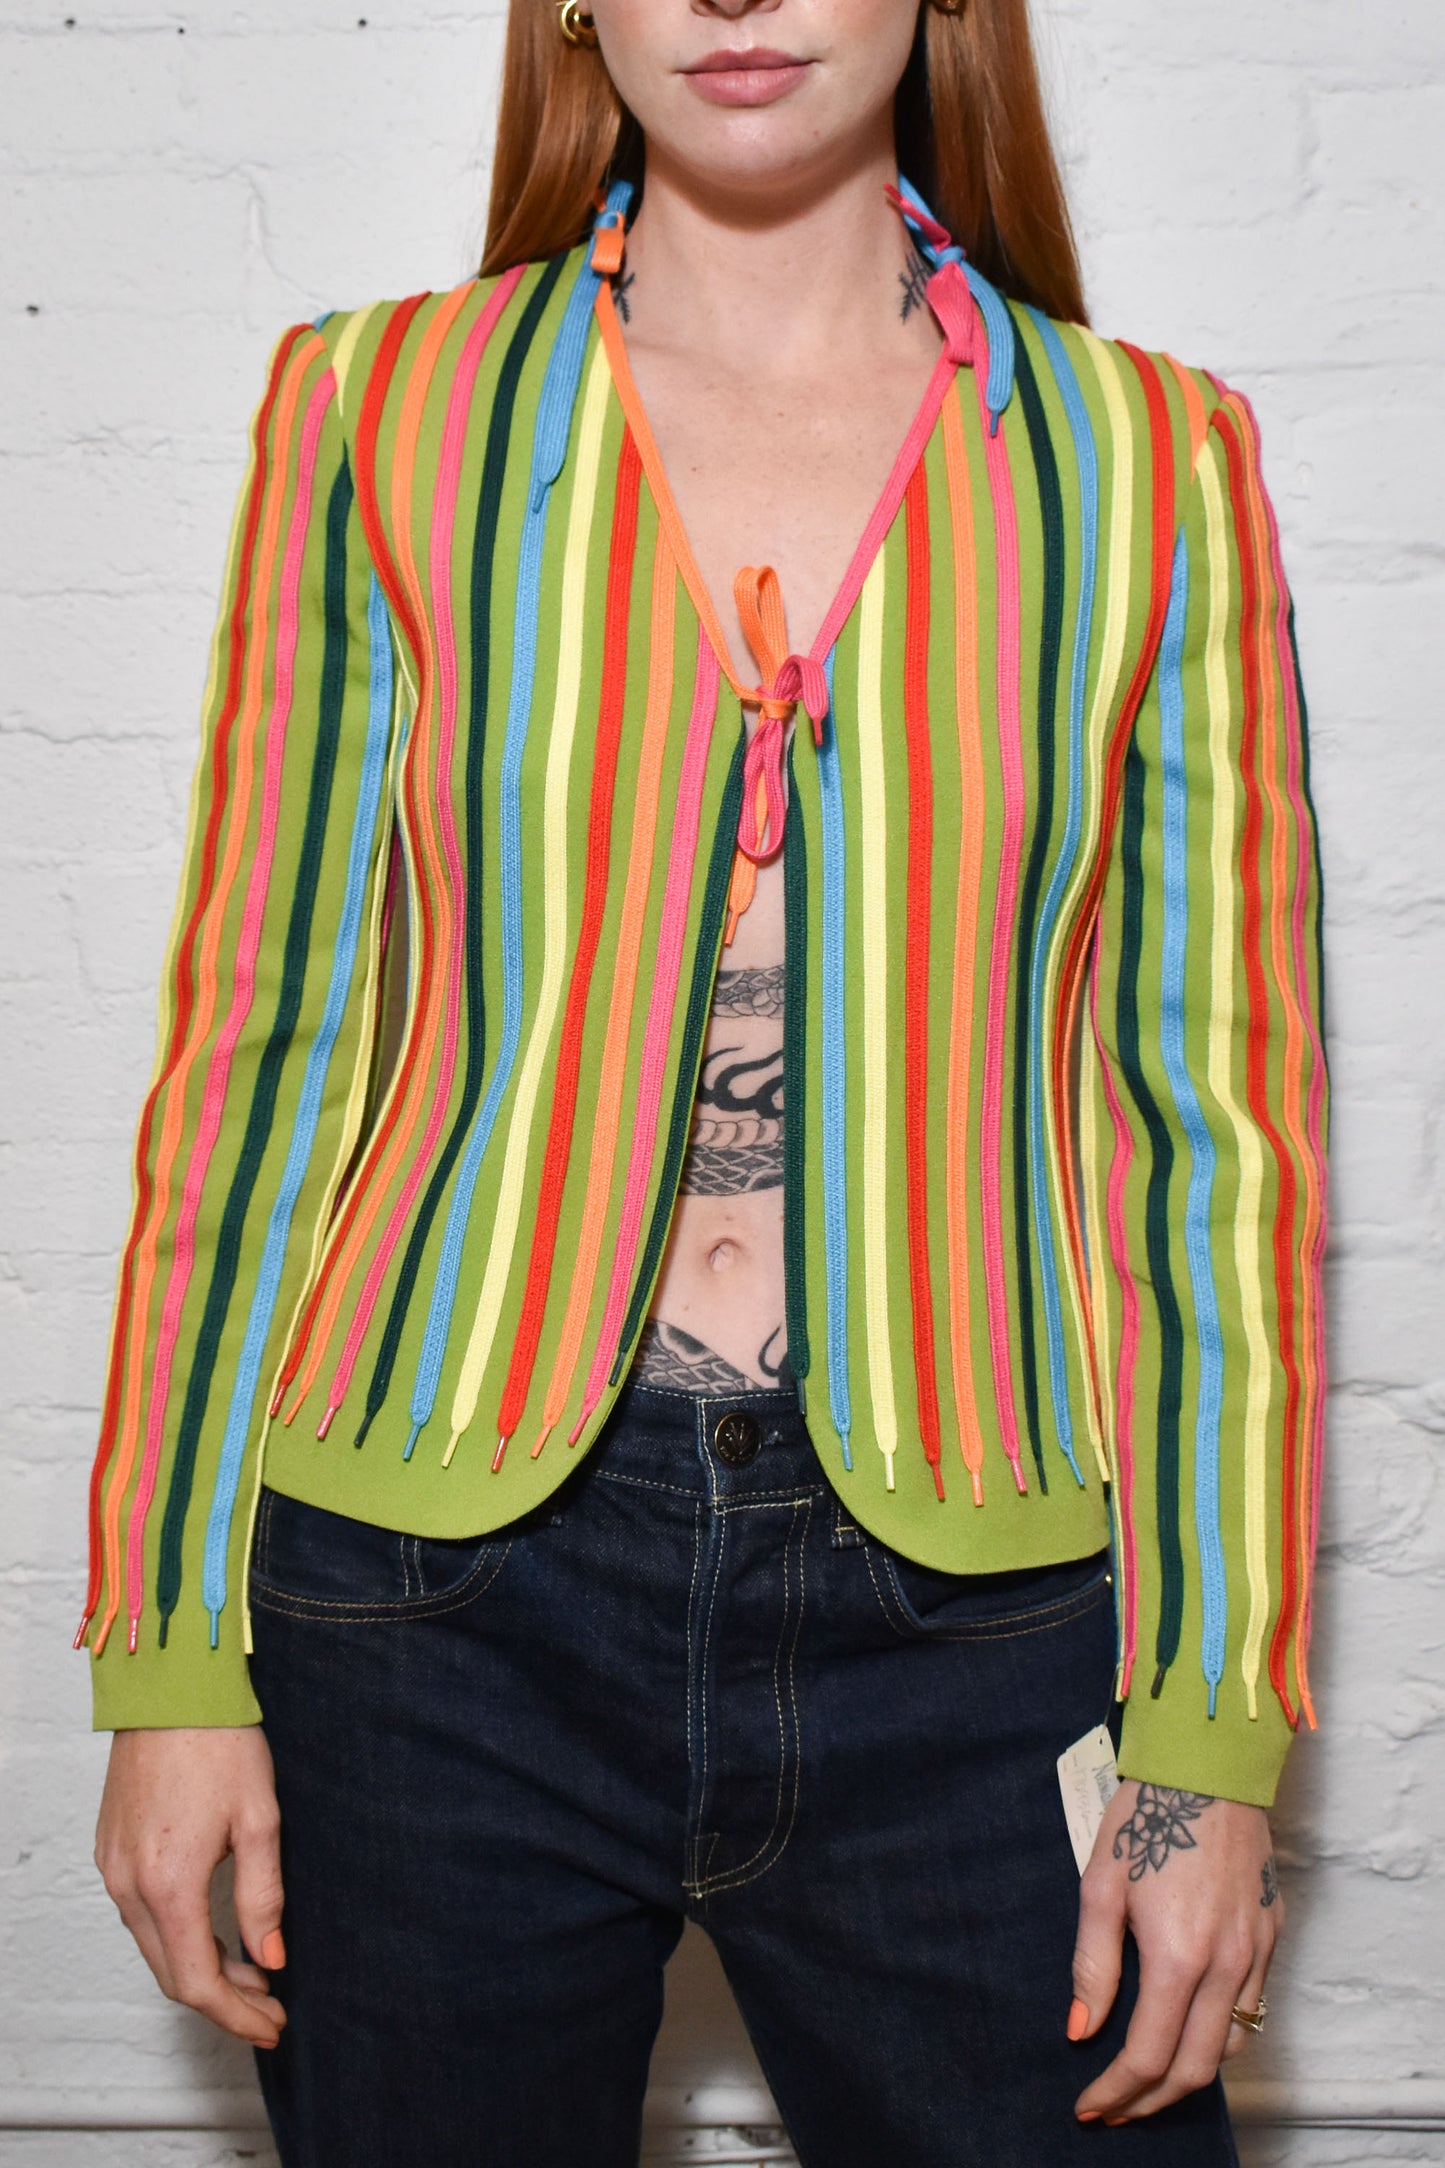 Vintage 1990s "Moschino Cheap and Chic" Rainbow Shoe Laces Blazer